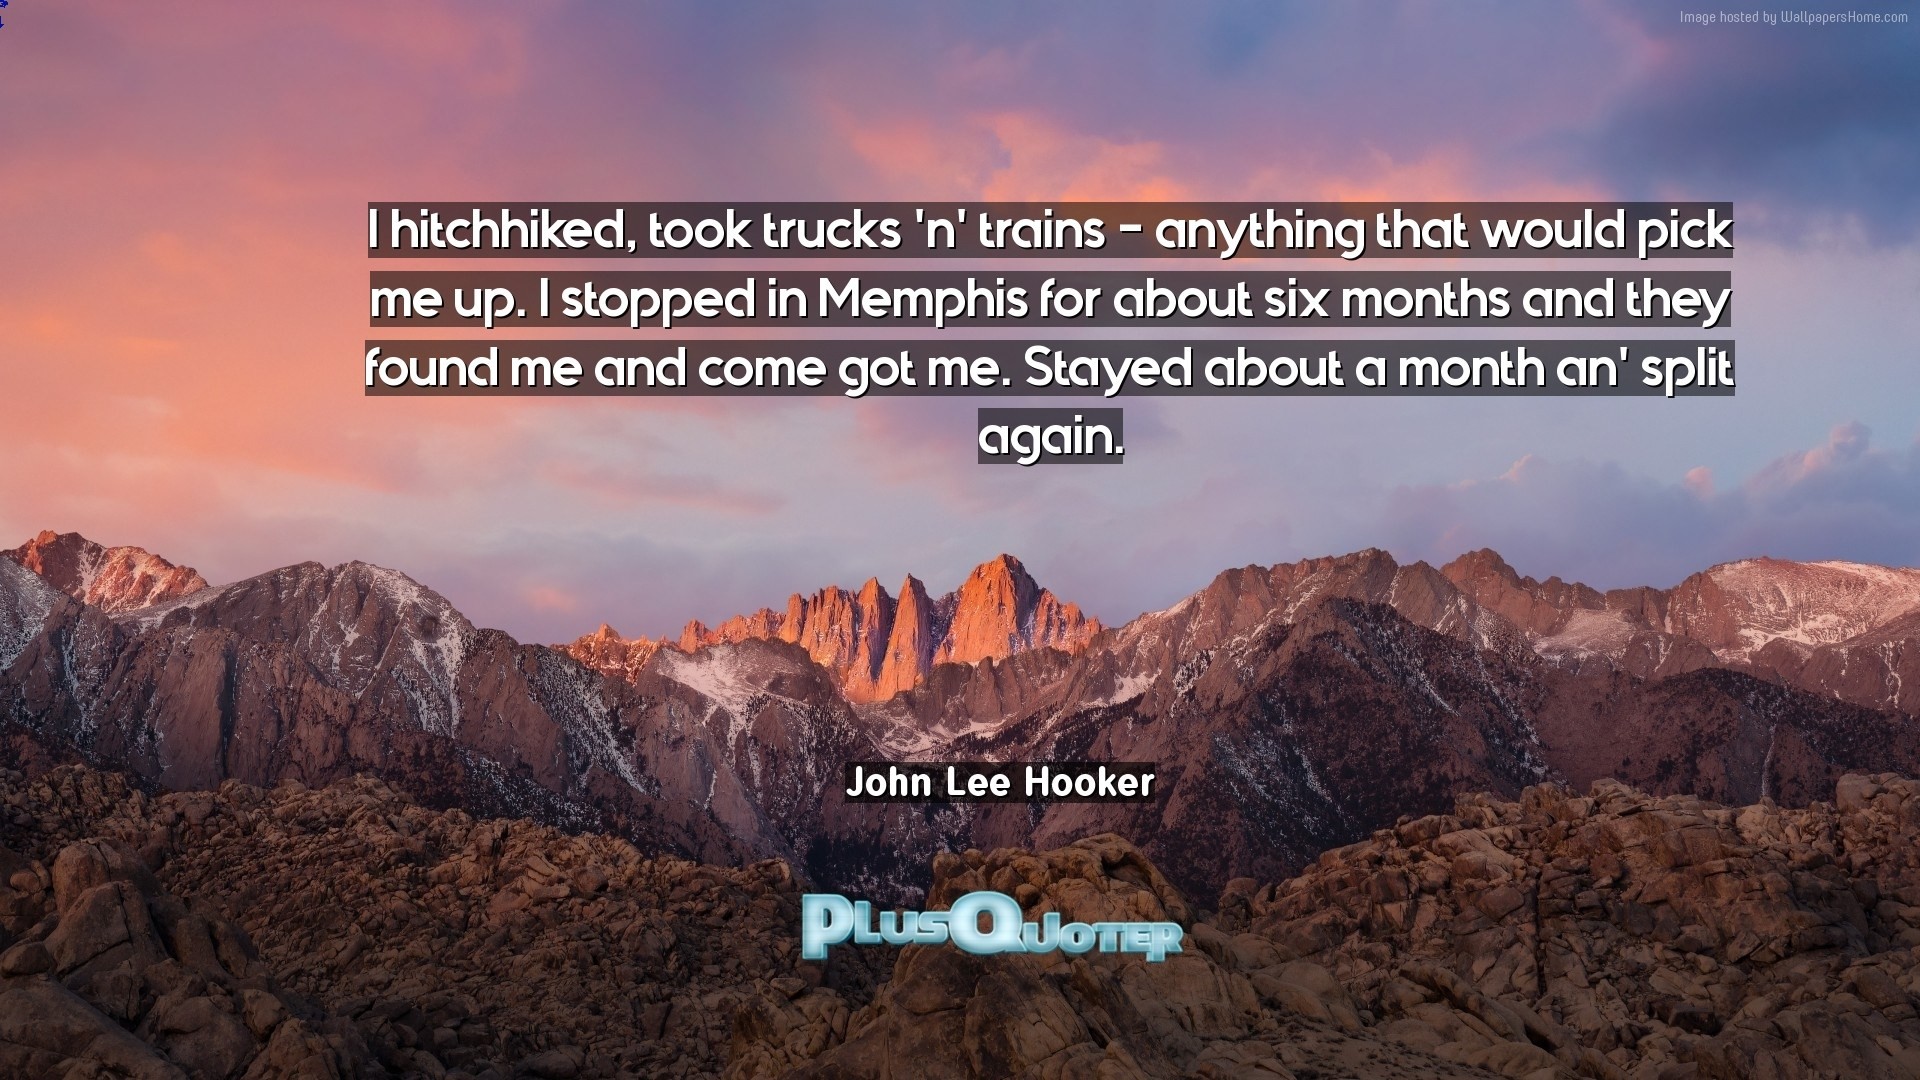 1920x1080 Download Wallpaper with inspirational Quotes- "I hitchhiked, took trucks